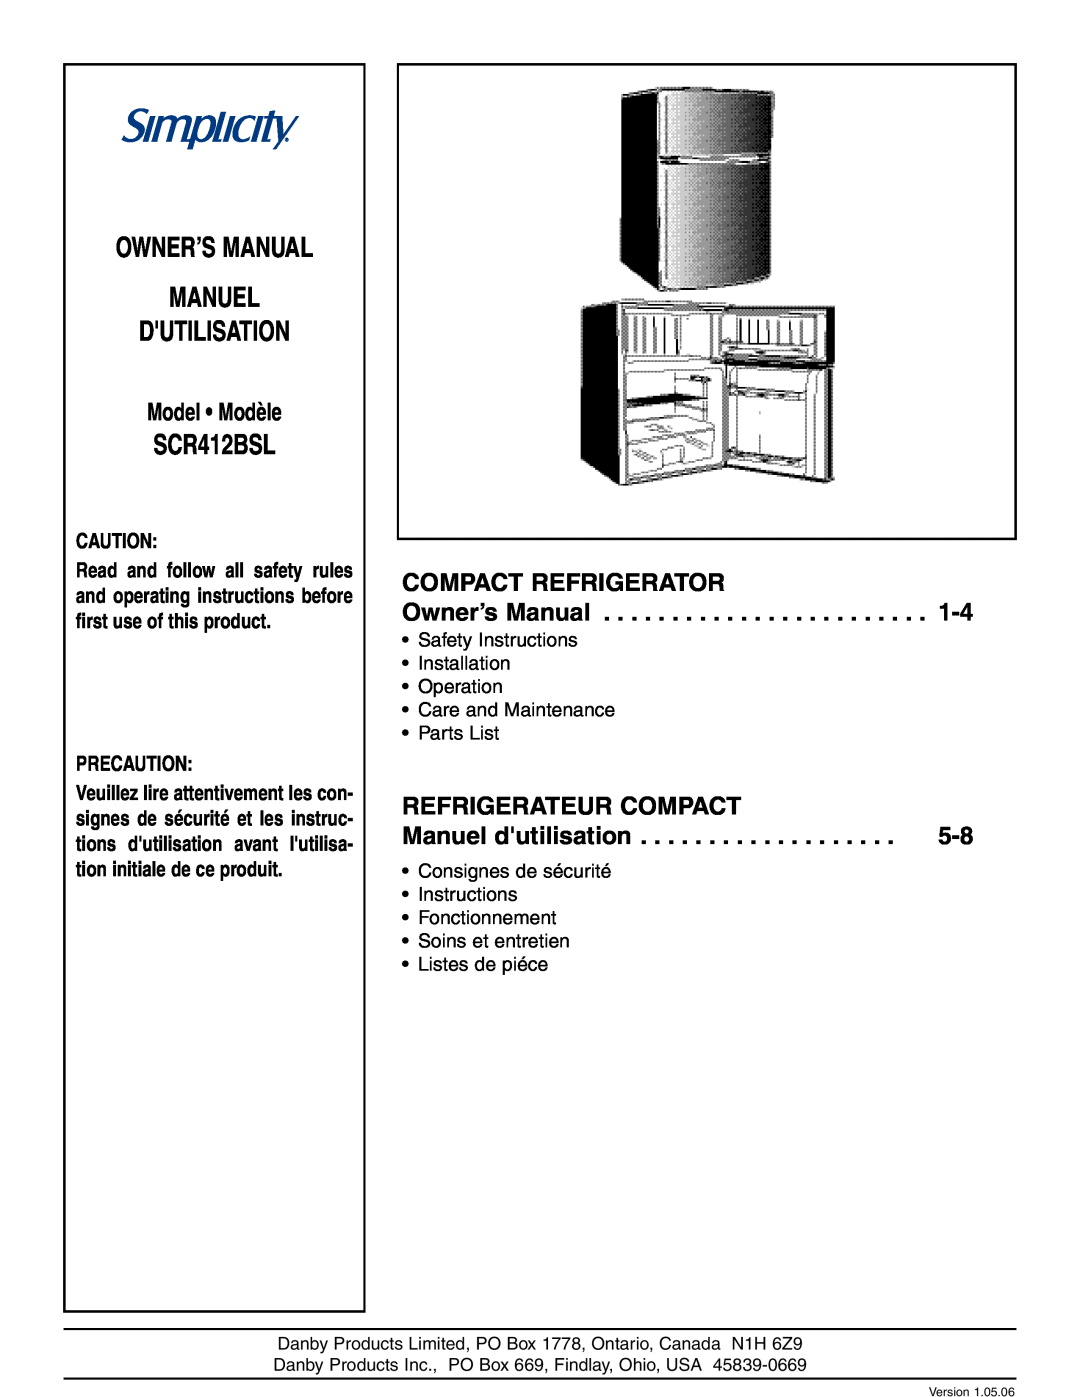 Simplicity SCR412BLS owner manual SCR412BSL, Model Modèle, COMPACT REFRIGERATOR Owner’s Manual, Precaution 